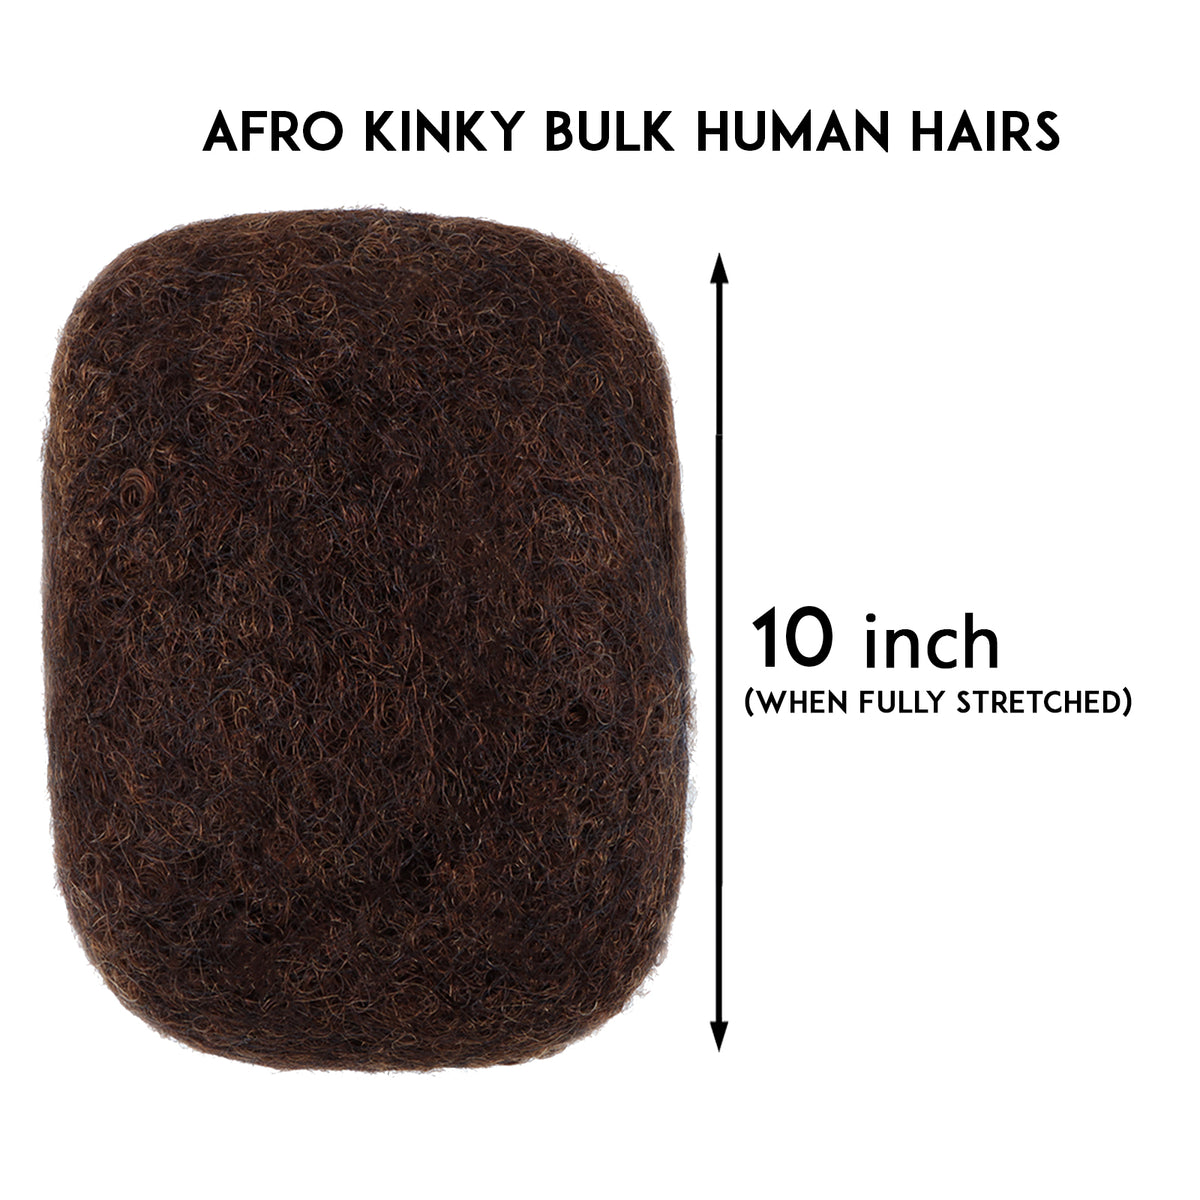 Afro Kinky Human Hairs For Making,Repairing & Bulking Locs 10 Inch Long Afro Kinky Bulk Human Hair For Dreadlock Extensions 100% Natural Afro Hairs For Twisting & Braiding 29g/1Oz (#4 / Brown, 10 inch)